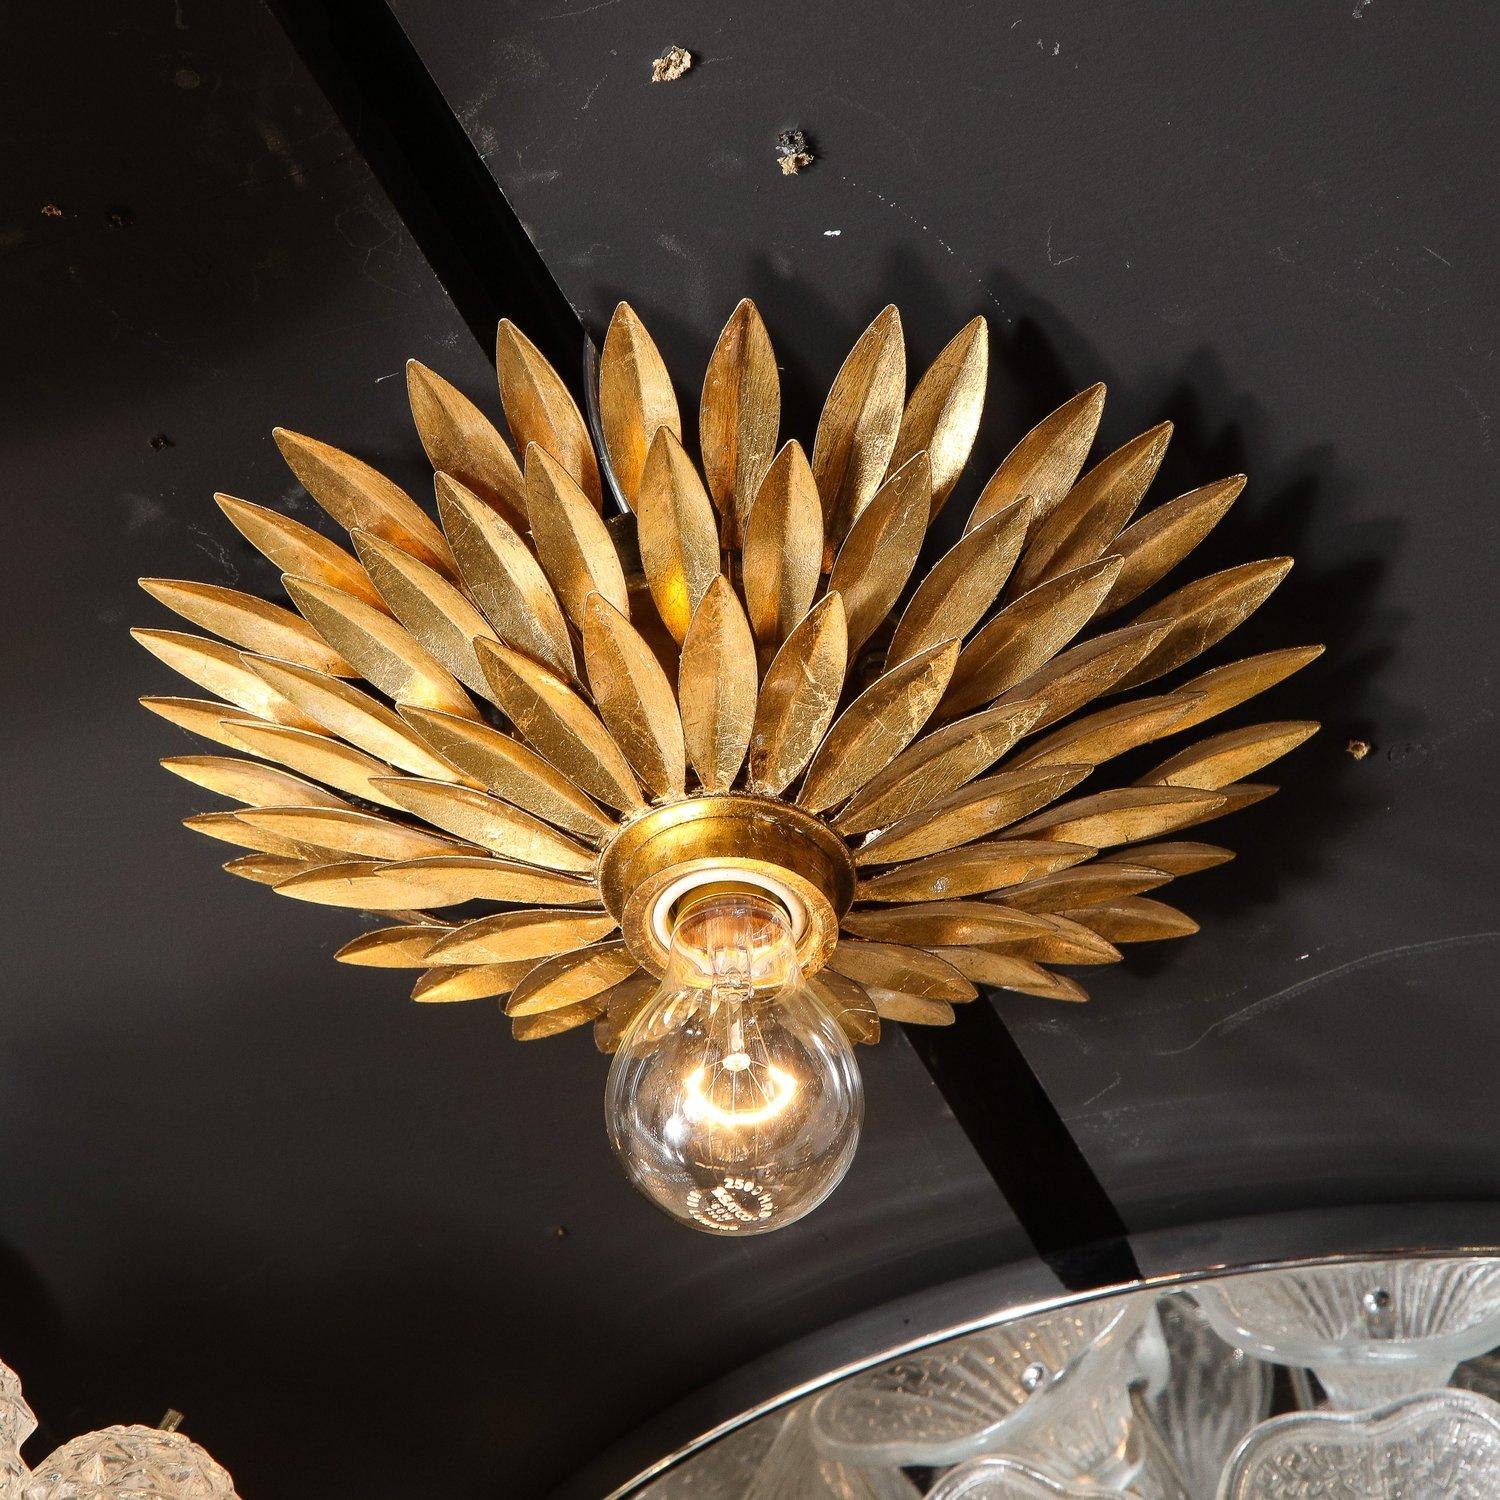 Pair of Hollywood Regency gilded brass starburst flush mount chandeliers. Individual leaves with only midrib fold detailing are arranged across three separate, tiered layers. A brass dipped bulb diffuses light to the sides. This set has been